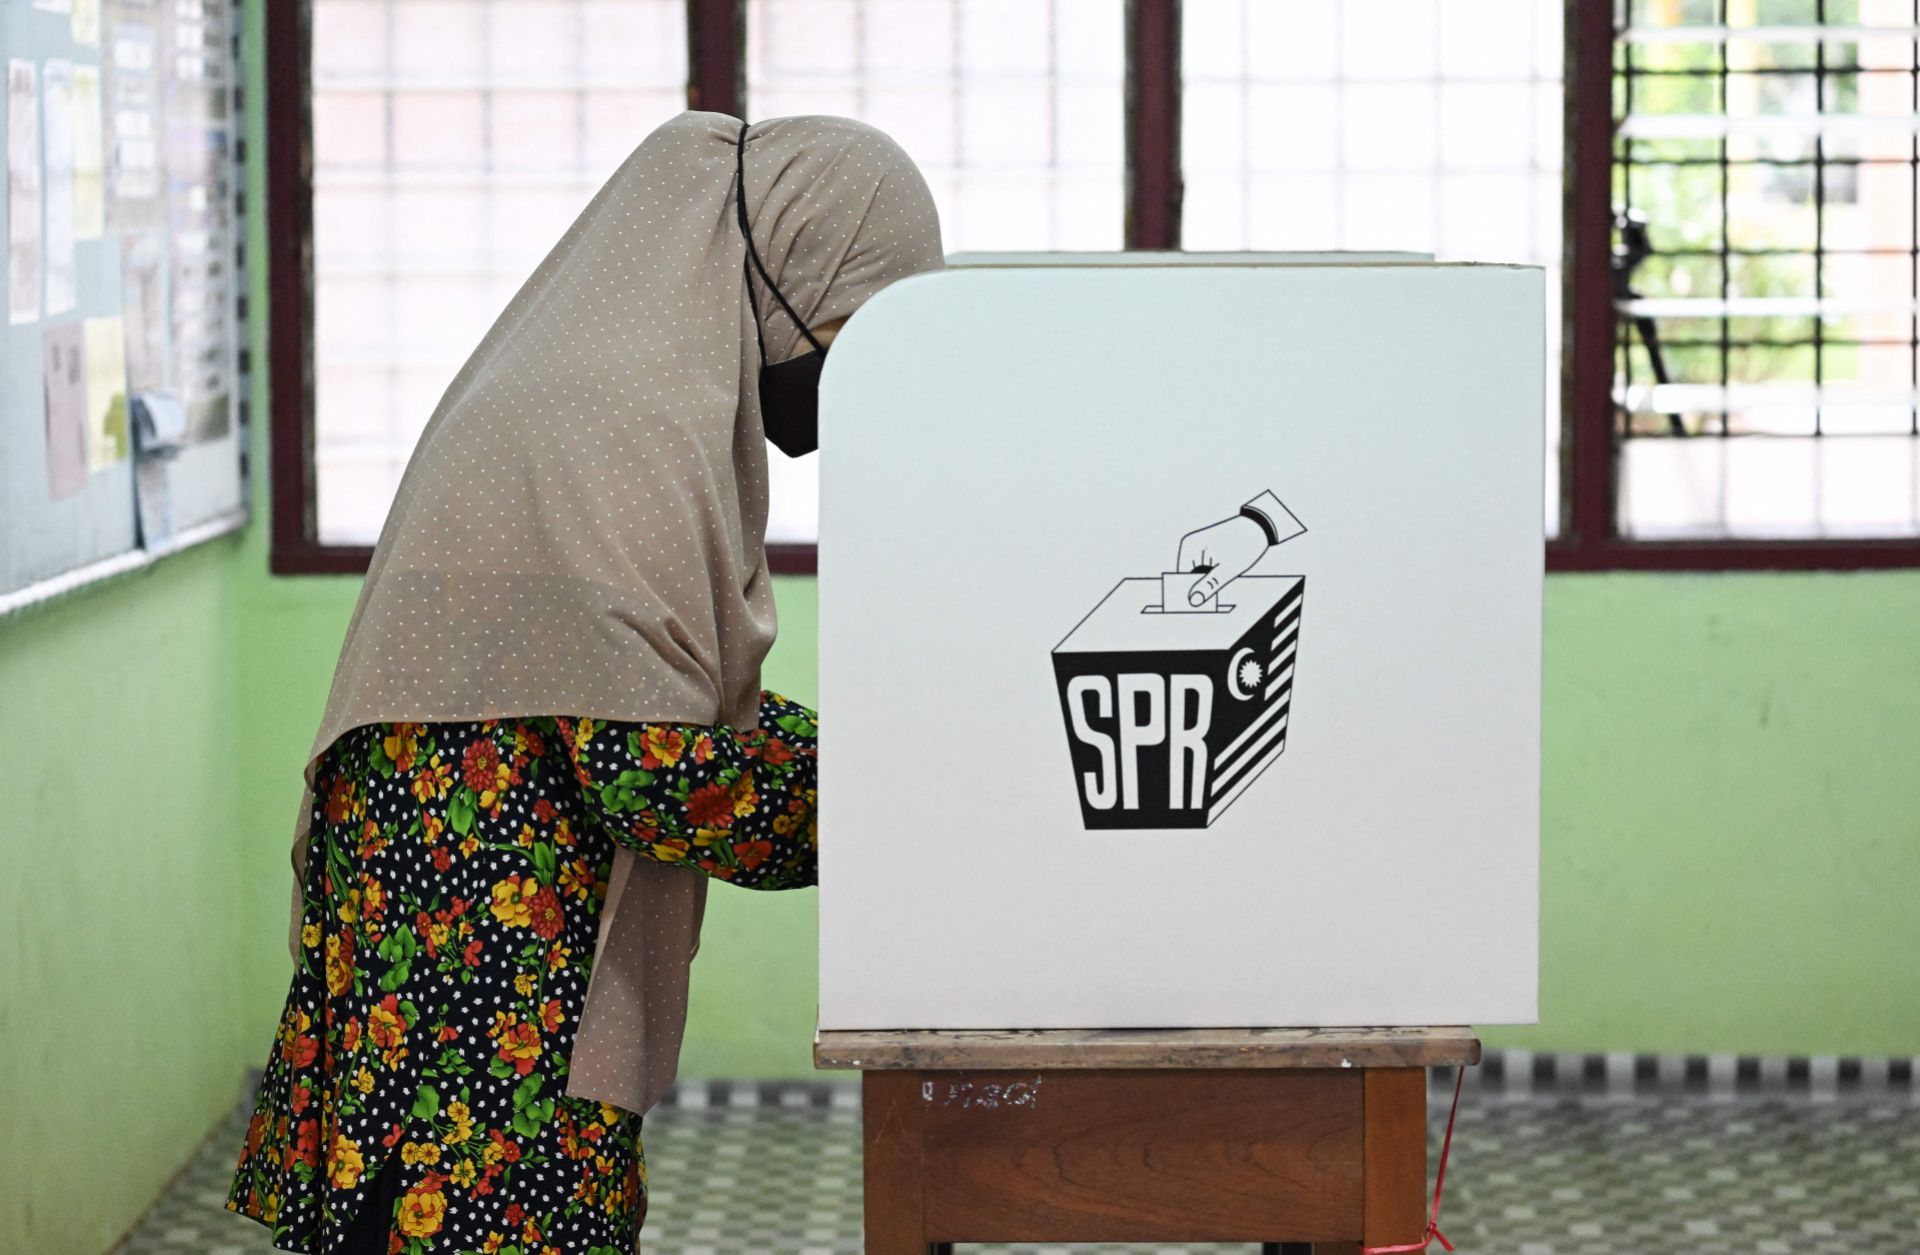 A woman casts a vote at a polling station during Malaysia's general election on Nov. 19, 2022. 